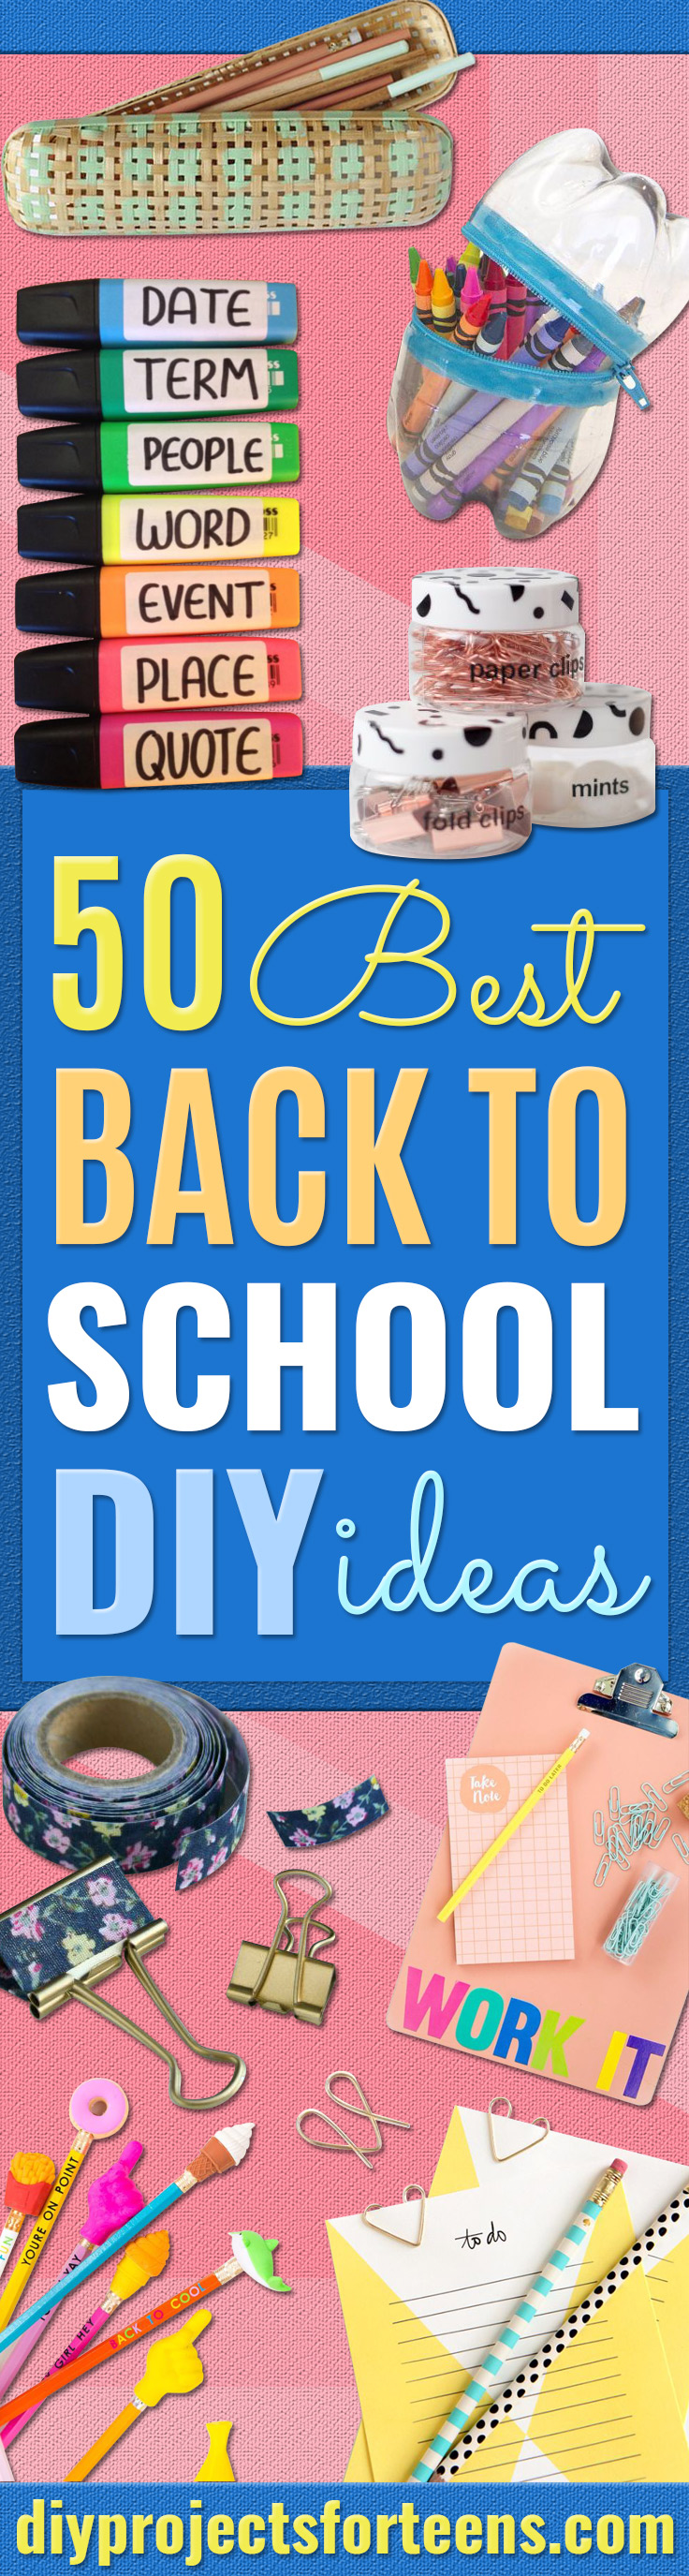 DYI School Supplies - Easy DIY Crafts and Do It Yourself Ideas for Back To School - Pencils, Notebooks, Backpacks and Fun Gear for Going Back To Class - Creative DIY Projects for Cheap School Supplies - Cute Crafts for Teens and Kids #backtoschool #teencrafts #kidscrafts #teen #diyideas #crafts